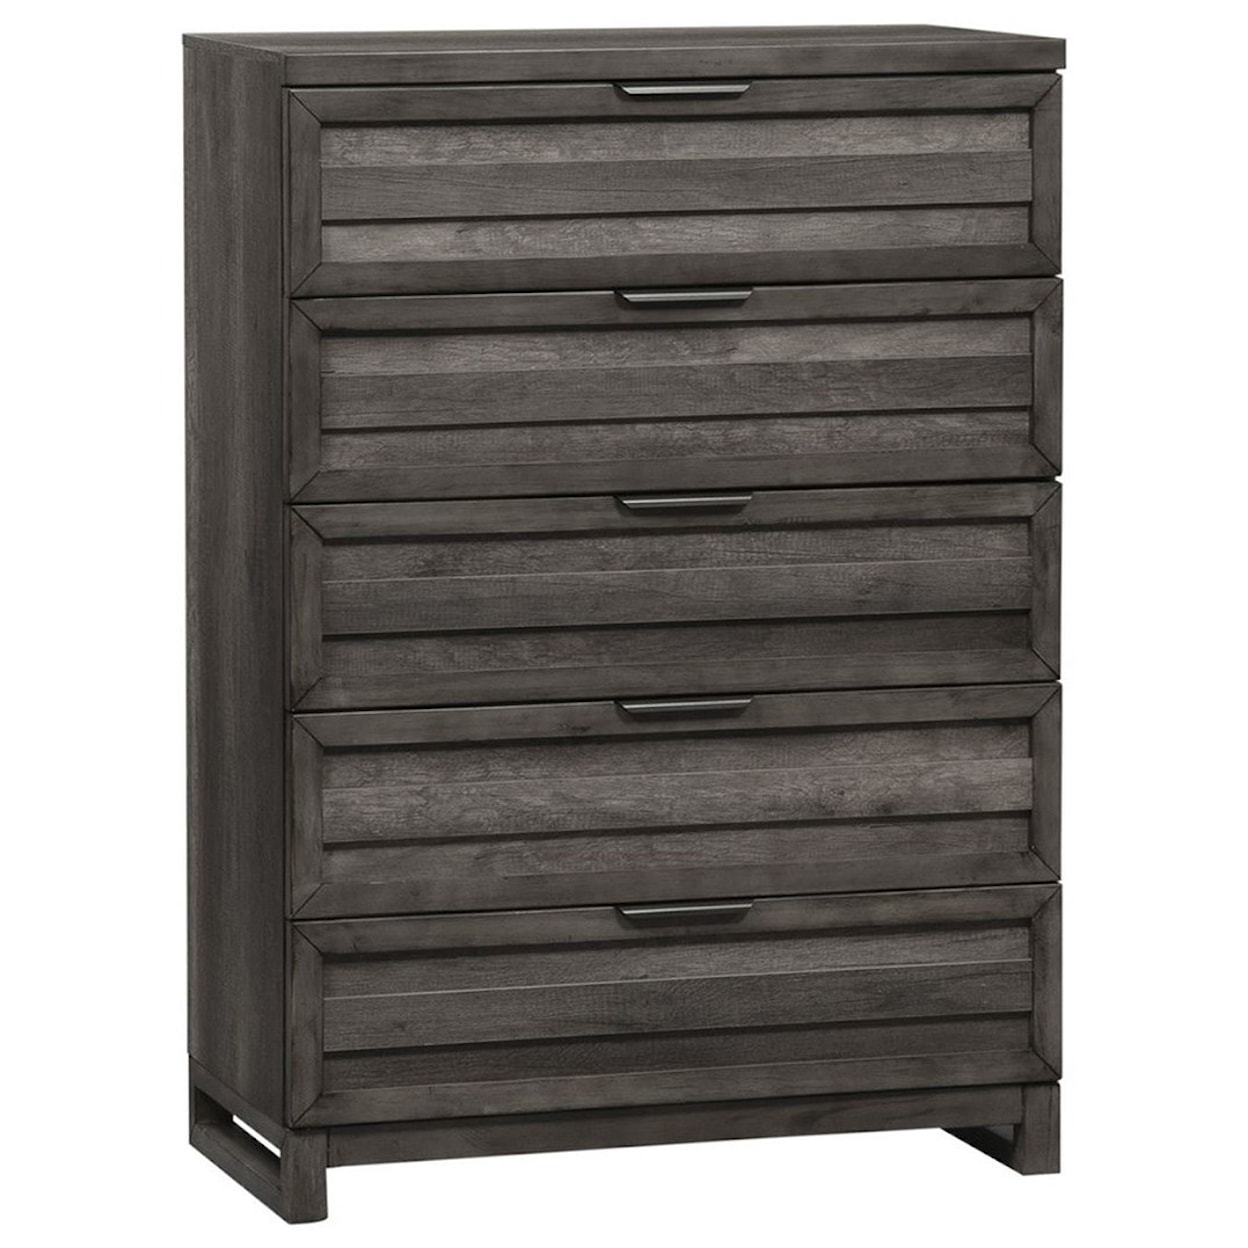 Liberty Furniture Tanners Creek 5 Drawer Chest